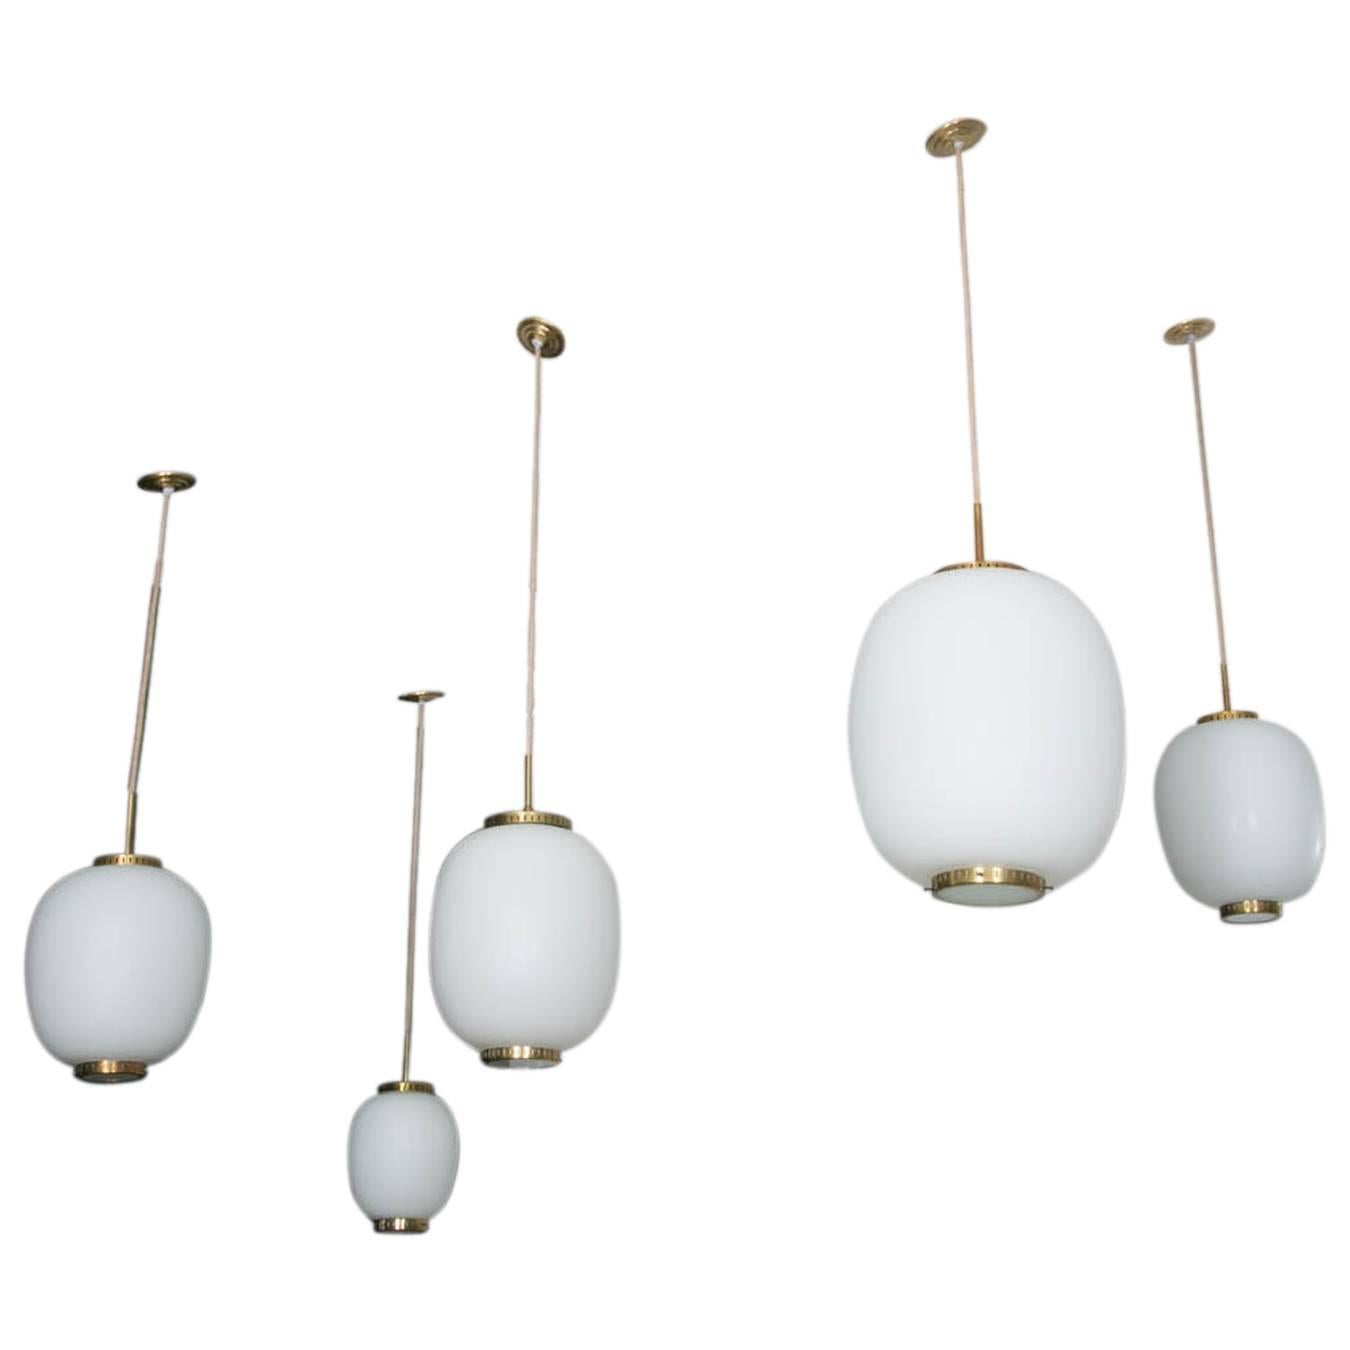 Collection of 9 opaline glass and brass ceiling fixtures.
See dimensions below
Designed by Bent Karlby for Lyfa.
Denmark, late 1950s.

Please note that this set of ceiling fixtures corresponds to the three items on the on last photo : Left ( Large